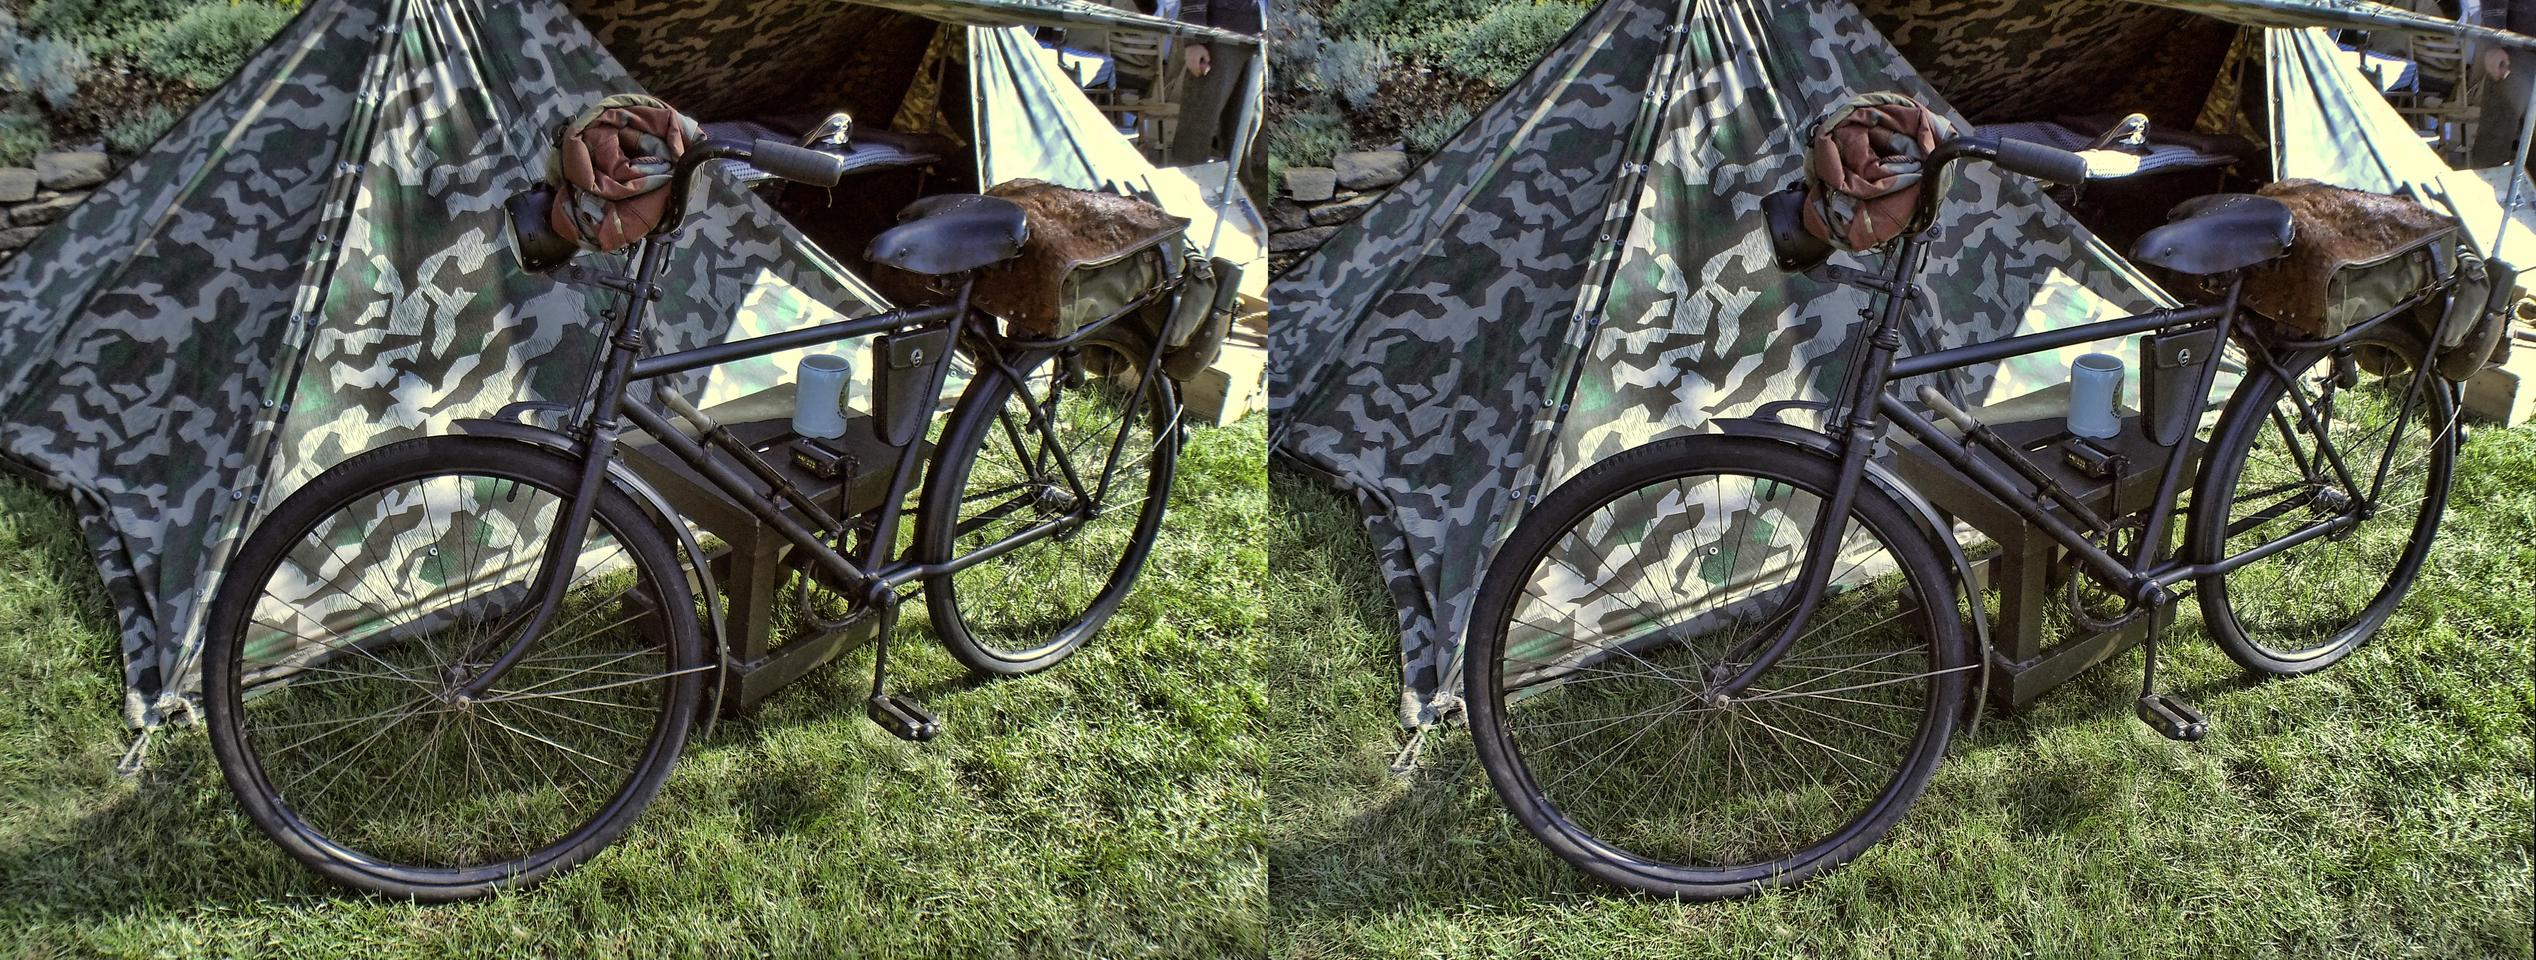 Collings Foundation WORLD WAR II Re-enactment Black Bicycle by Tent